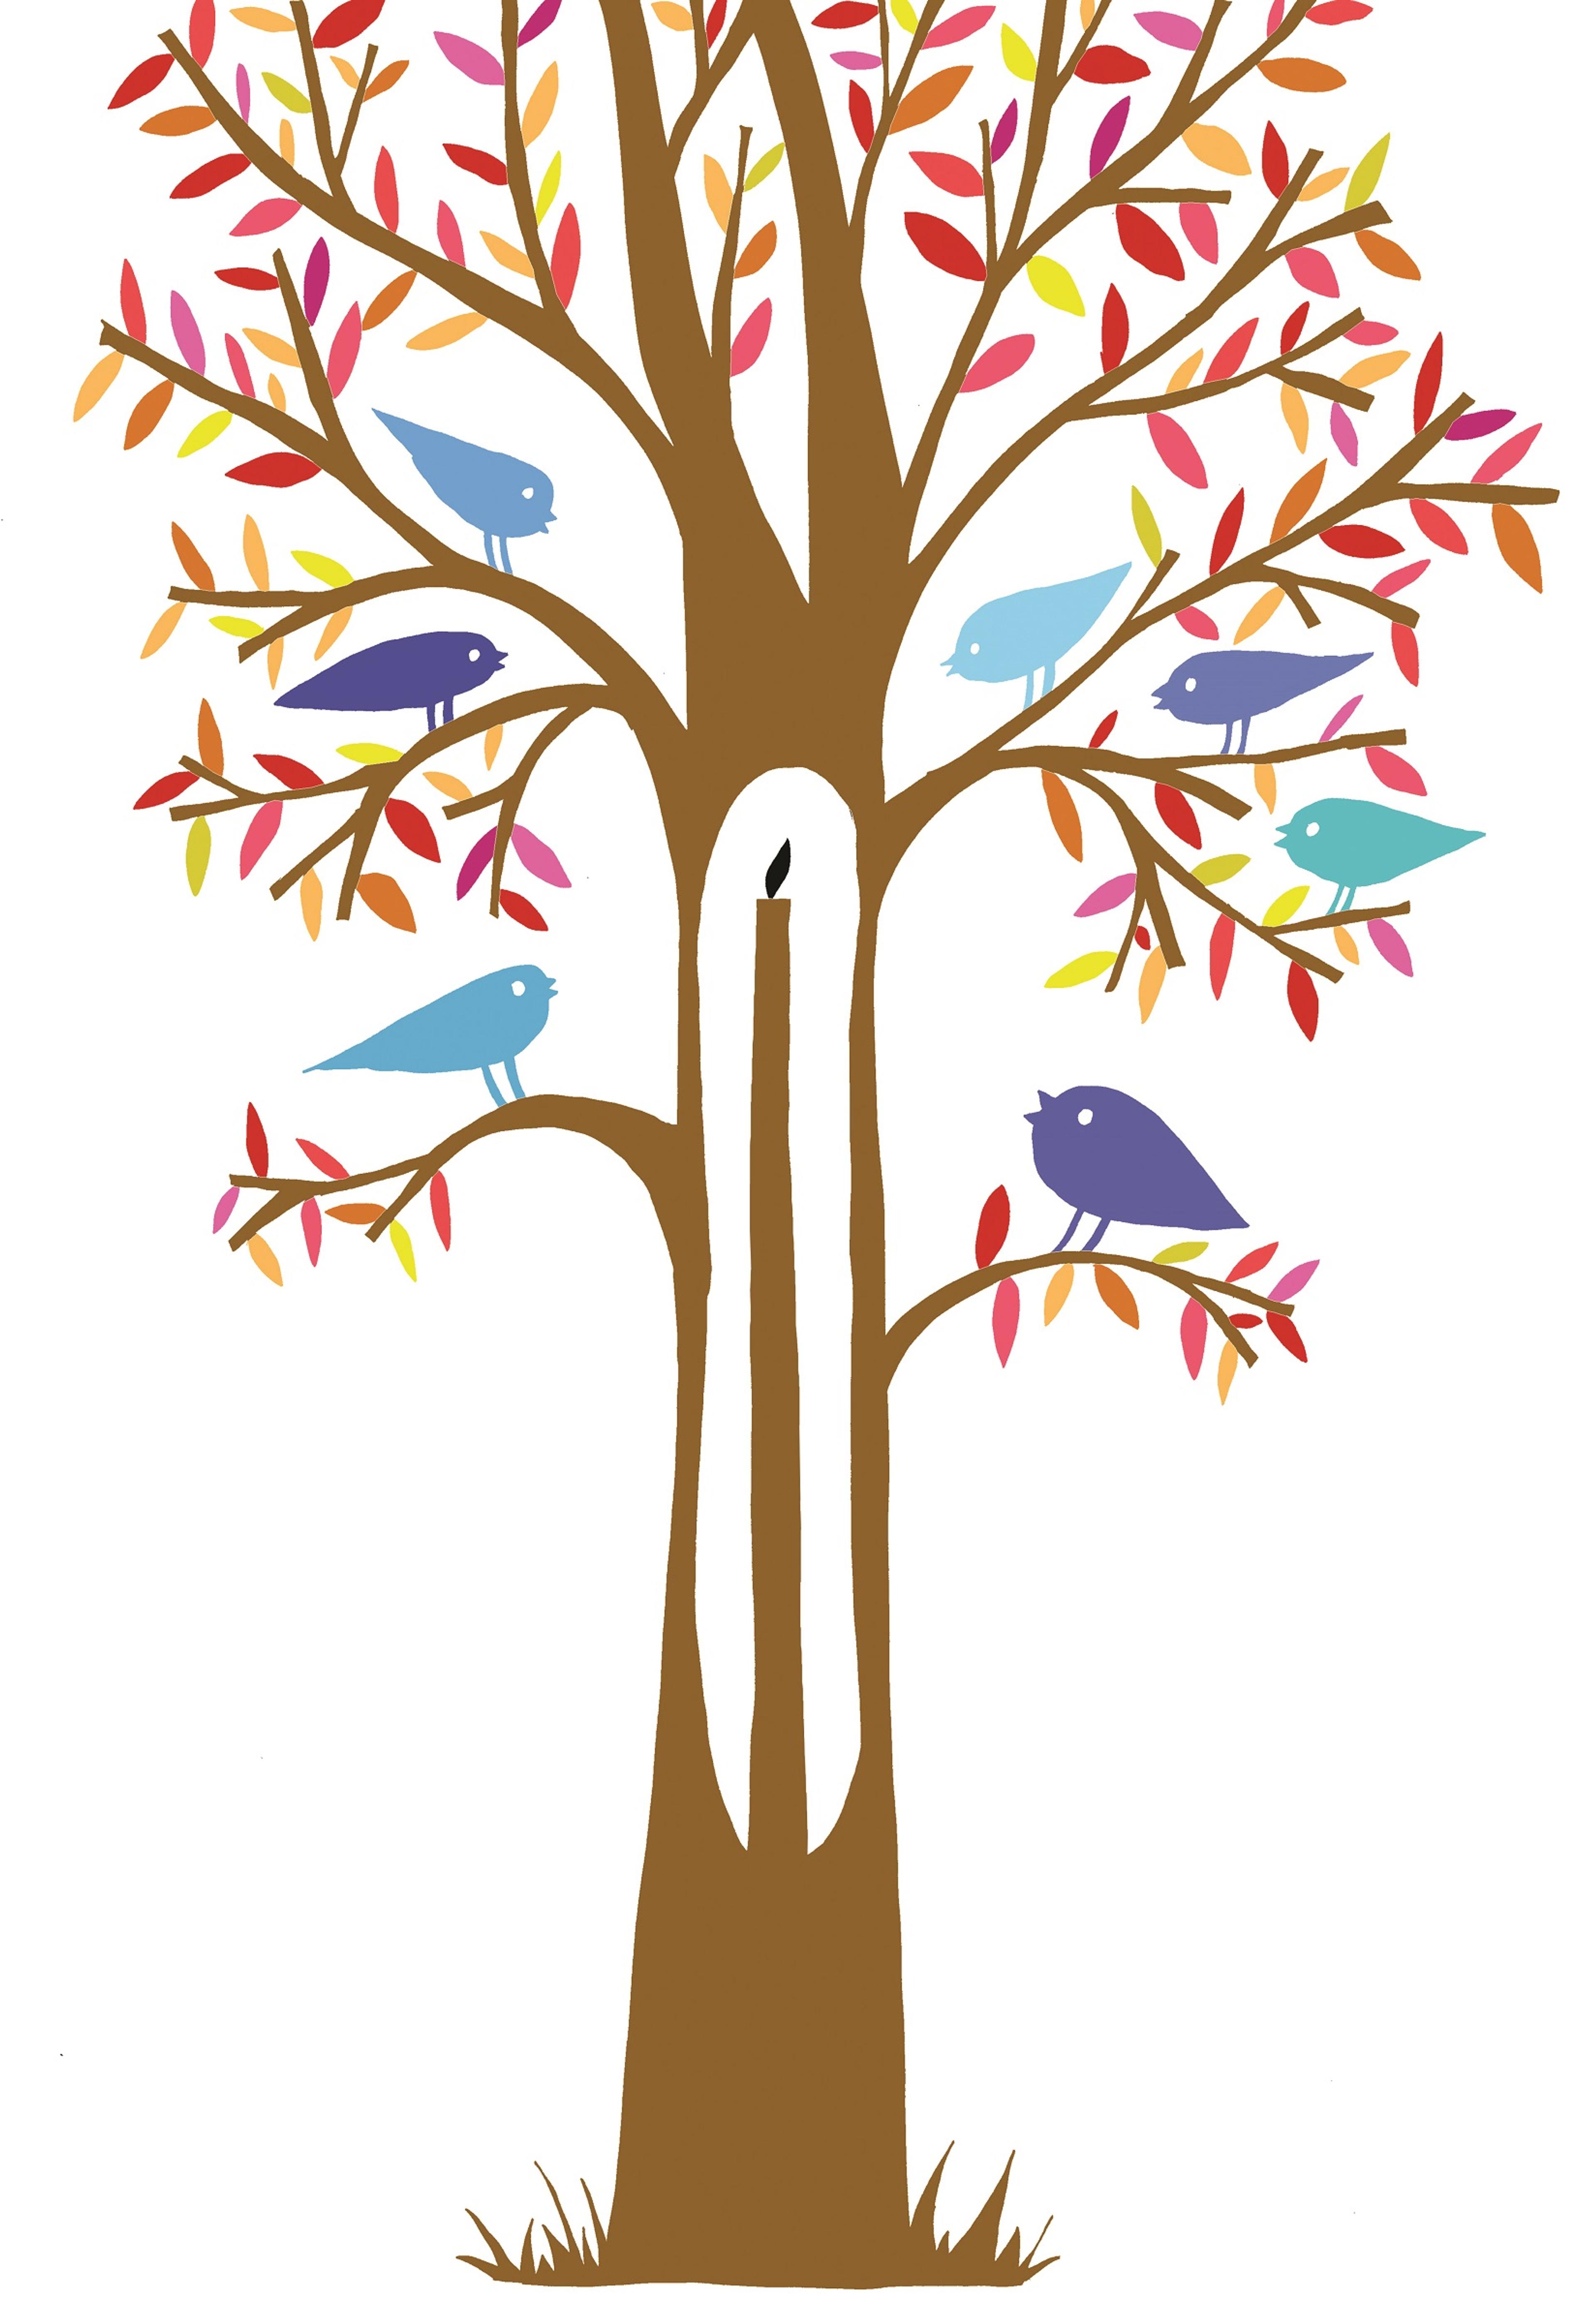 Illustration of blue birds looking at a candle set into a tree trunk